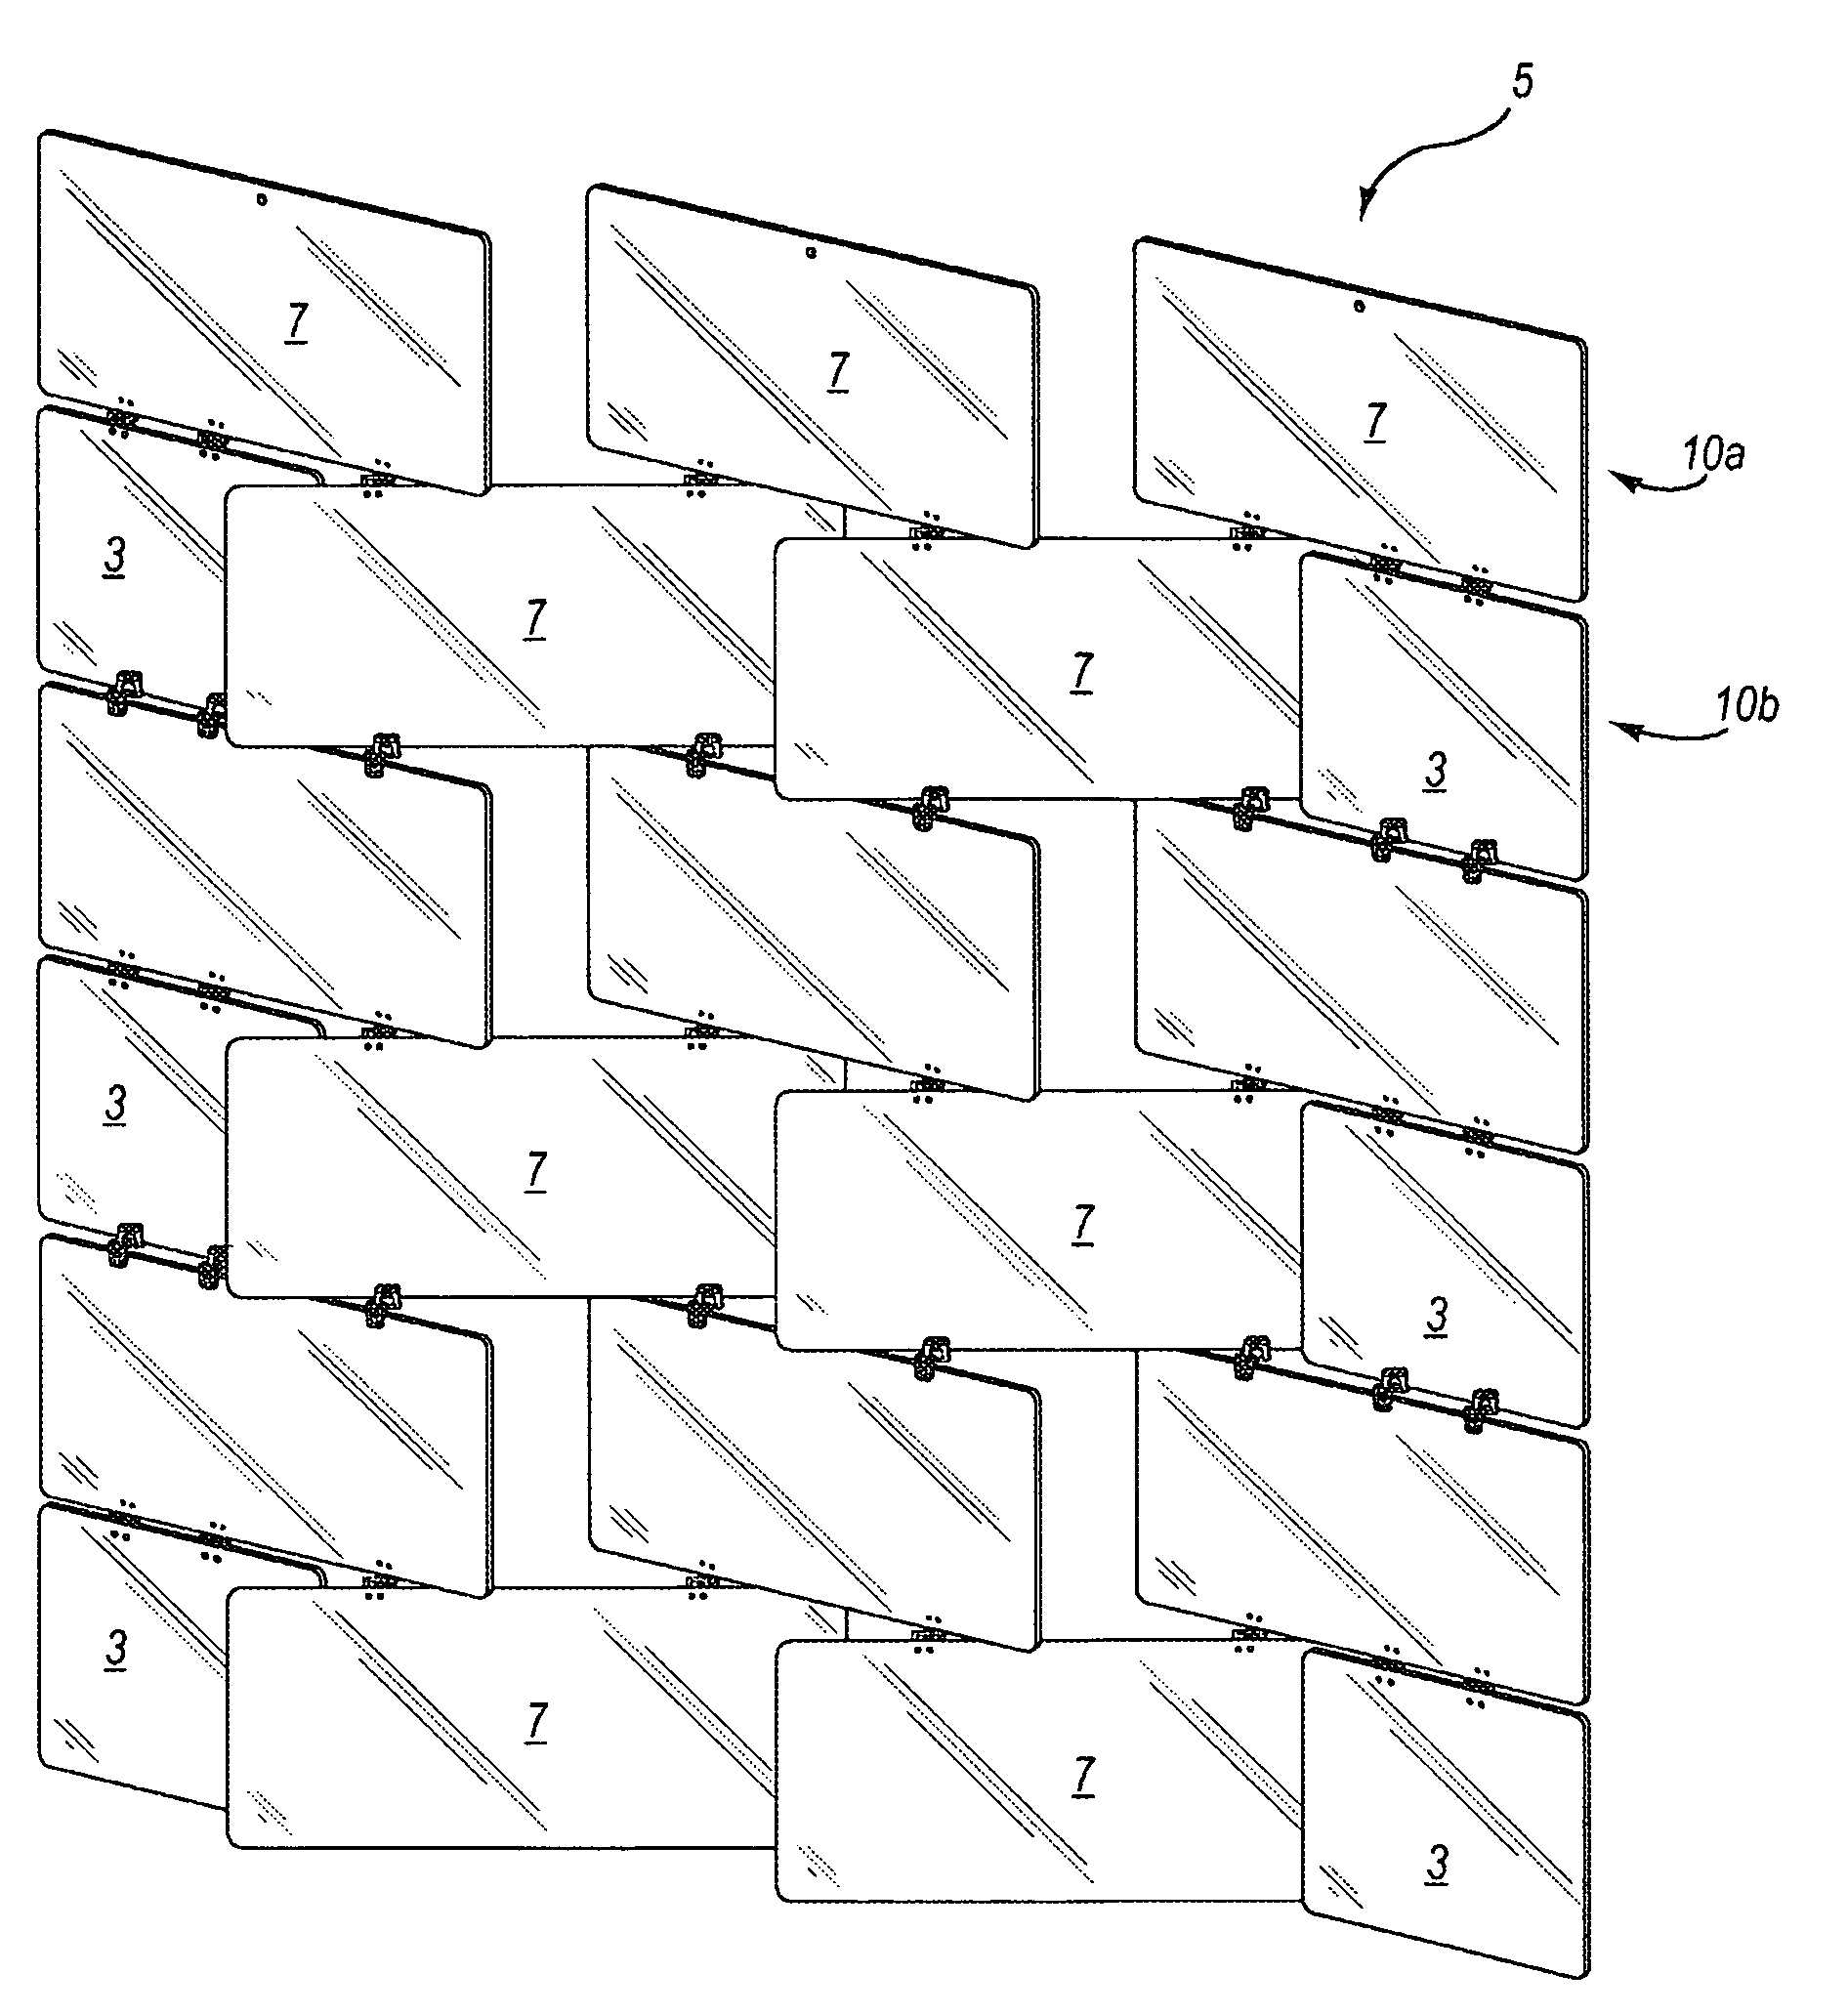 Partition with variable-angle tiles